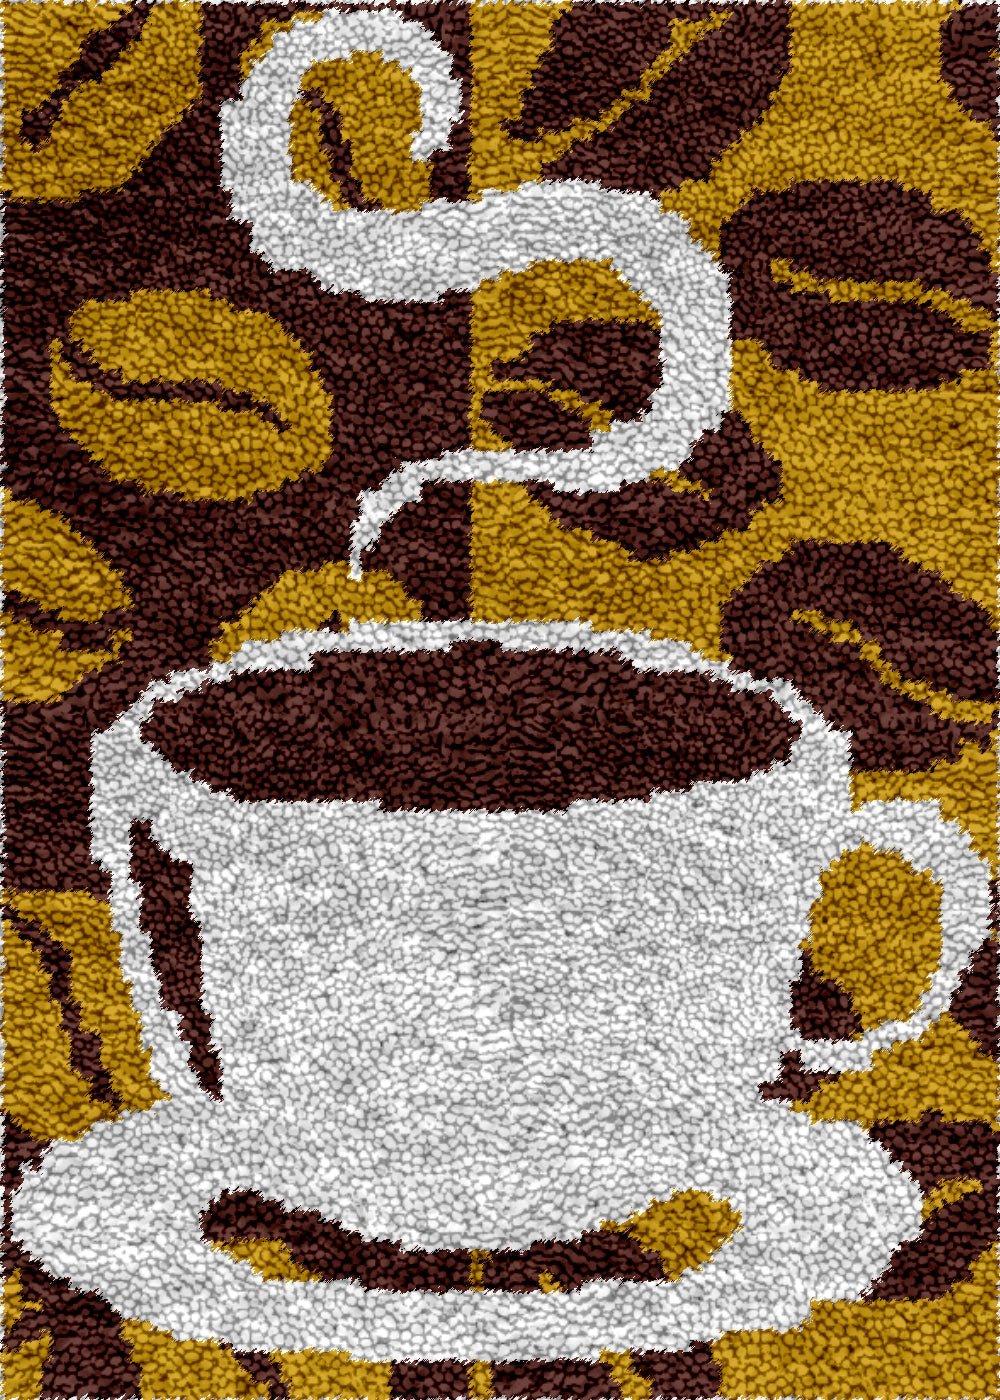 Cup of Coffee - Latch Hook Rug Kit - Latch Hook Crafts